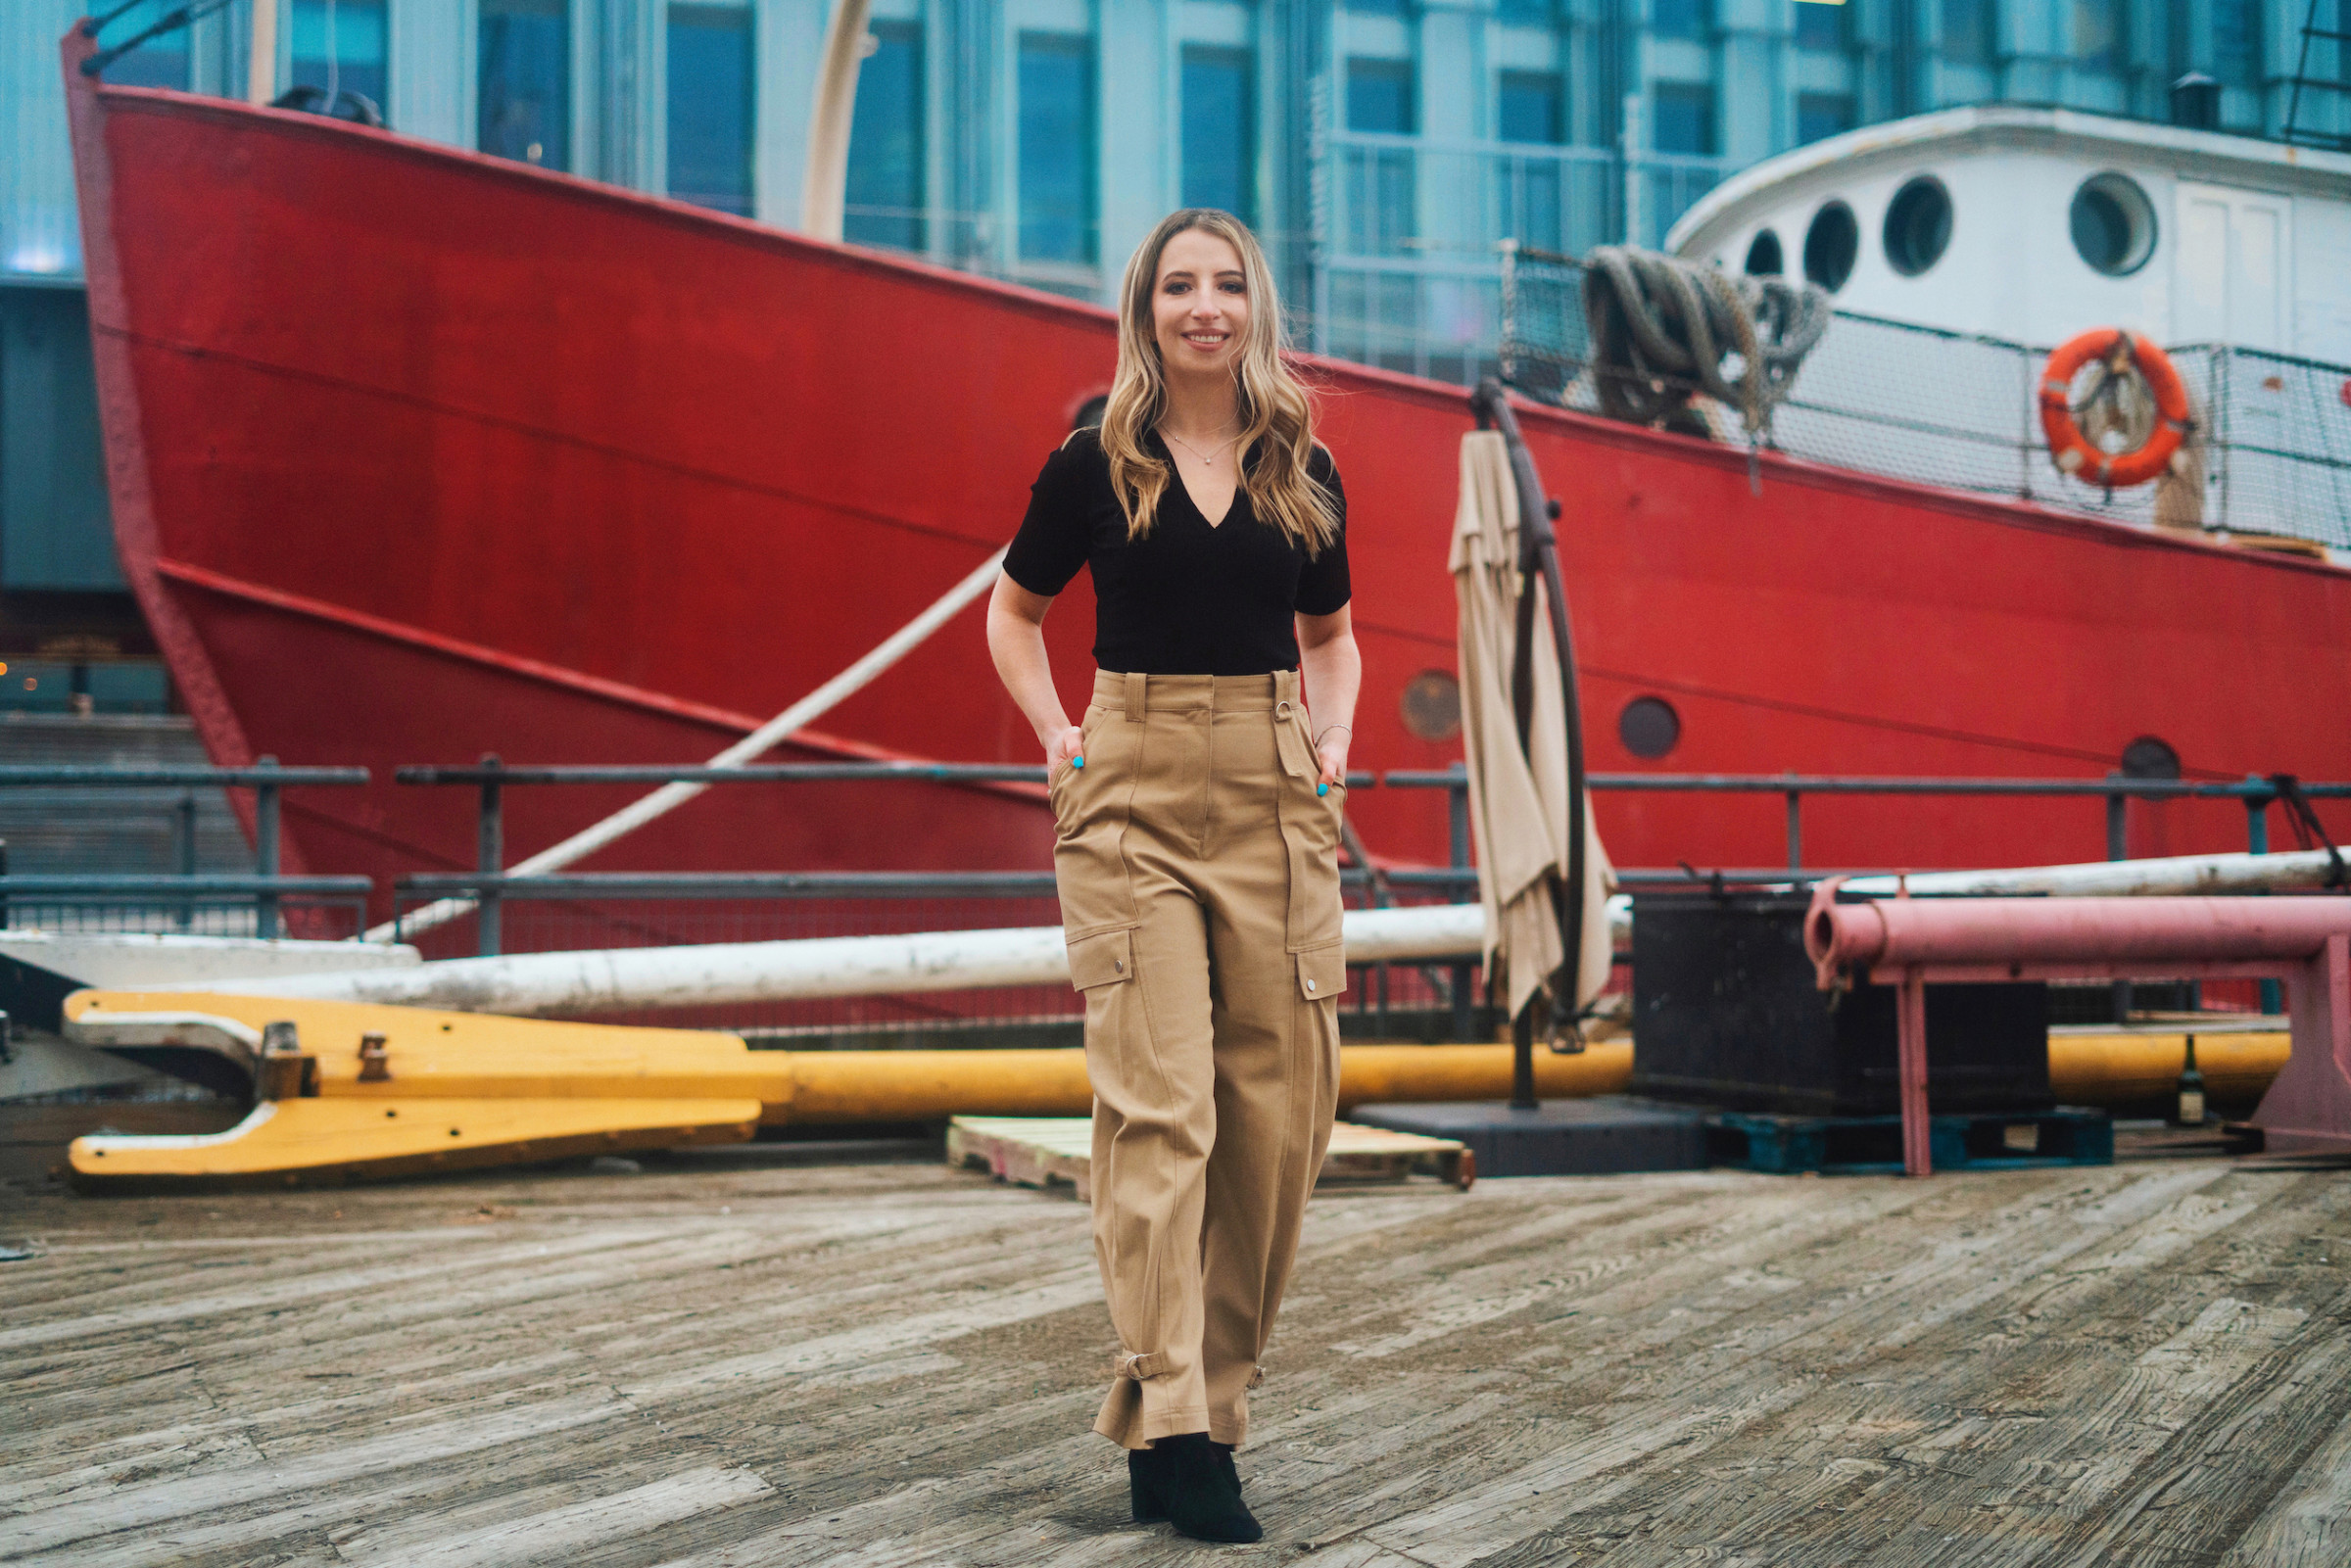 Author Peggy standing in front of a large red tug boat